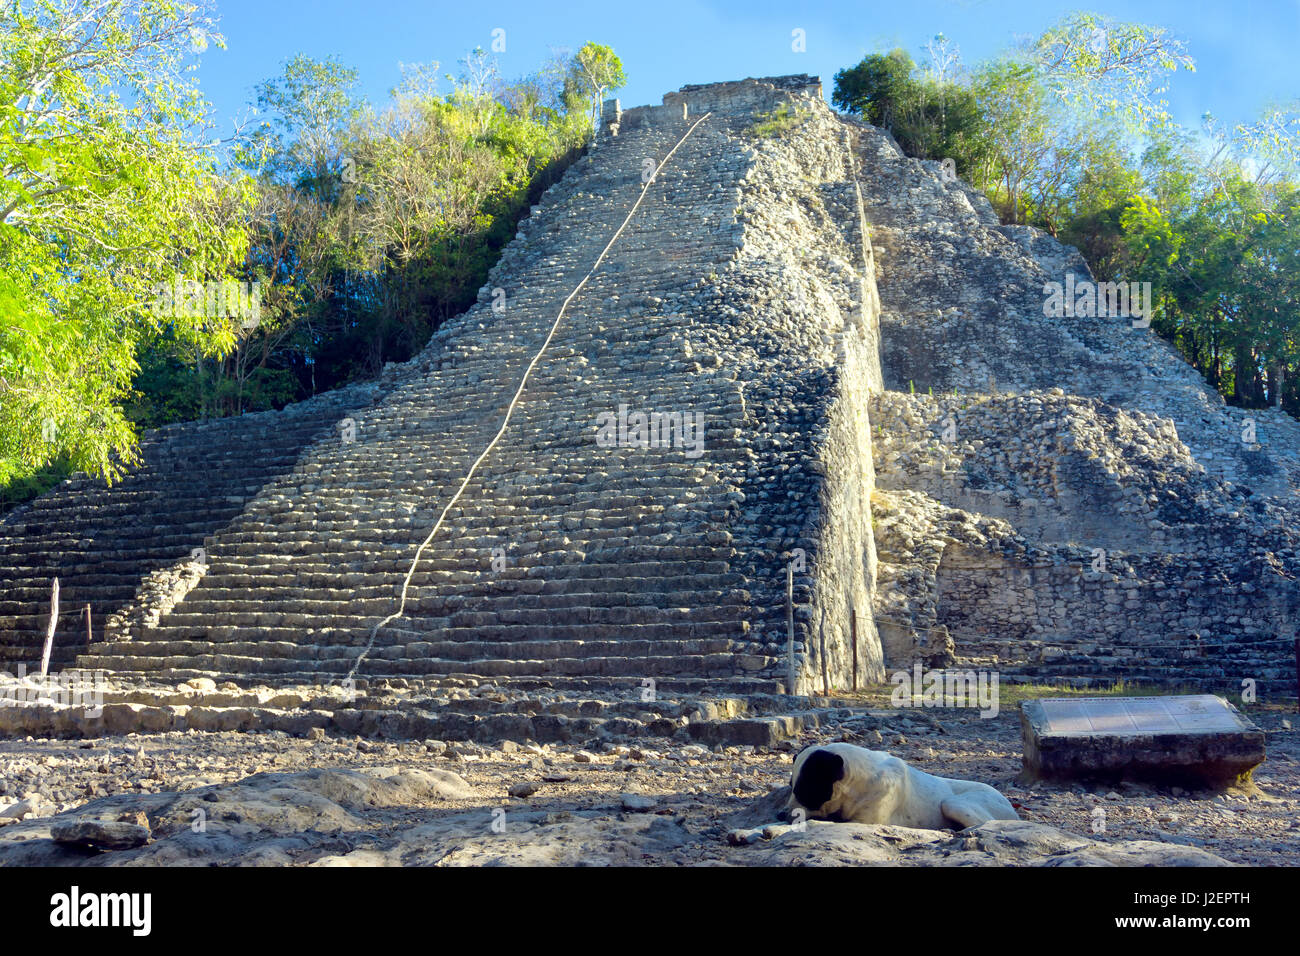 Nohoch Mul pyramid in in the Mayan ruins of Coba, Mexico Stock Photo